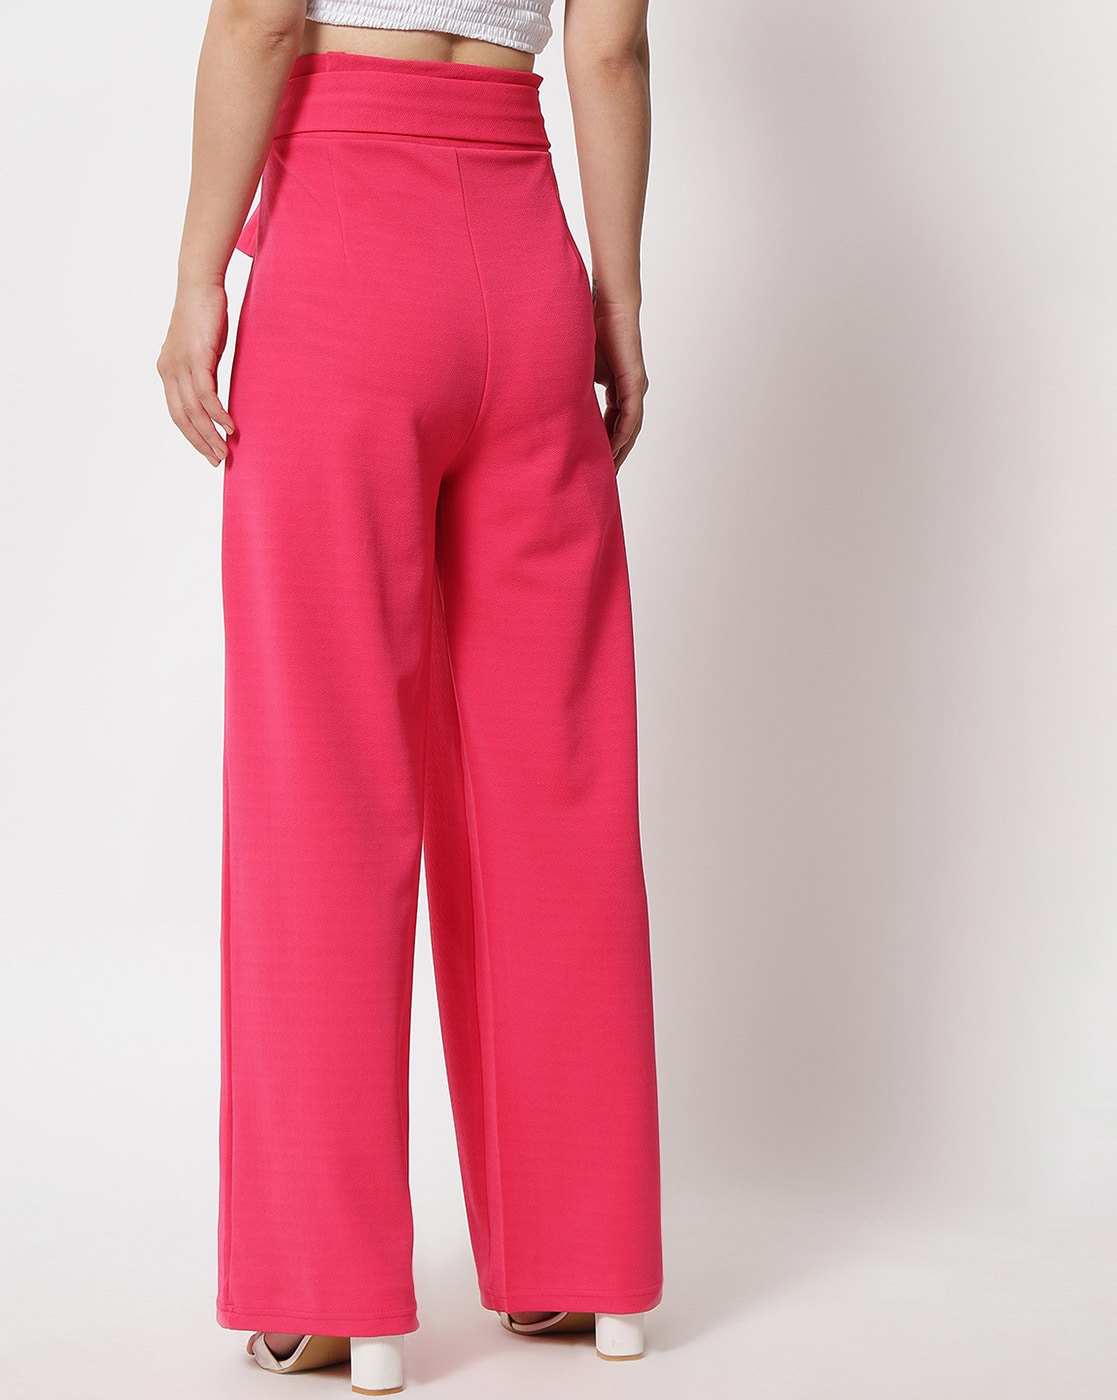 Buy KOTTY Women's High Rise Cotton Blend Relaxed Fit Trousers Baby Pink at